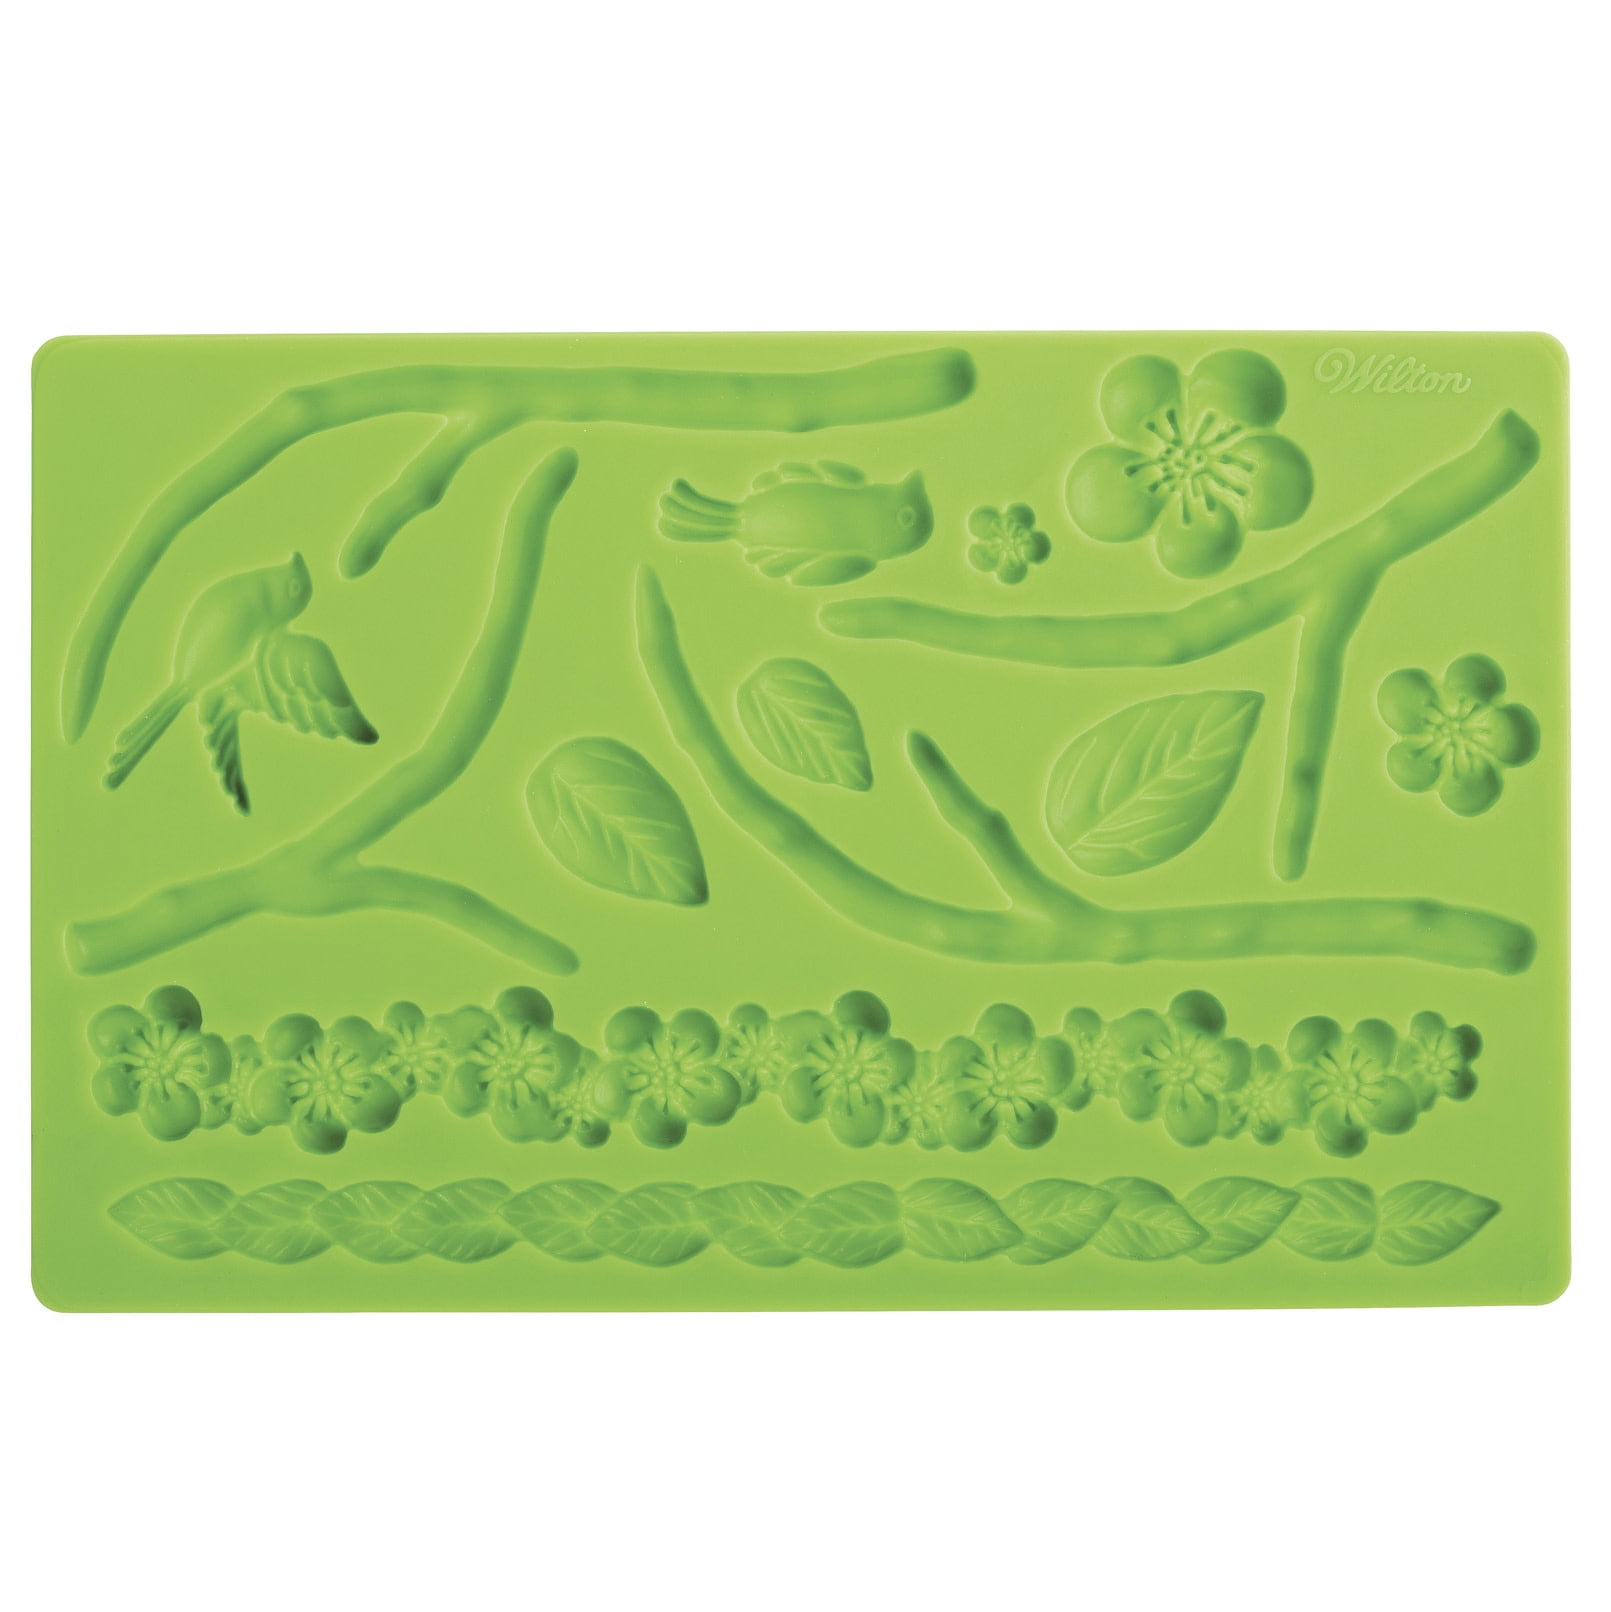 Wilton Flower and Leaf Fondant and Gum Paste Silicone Mold, 11-Cavity